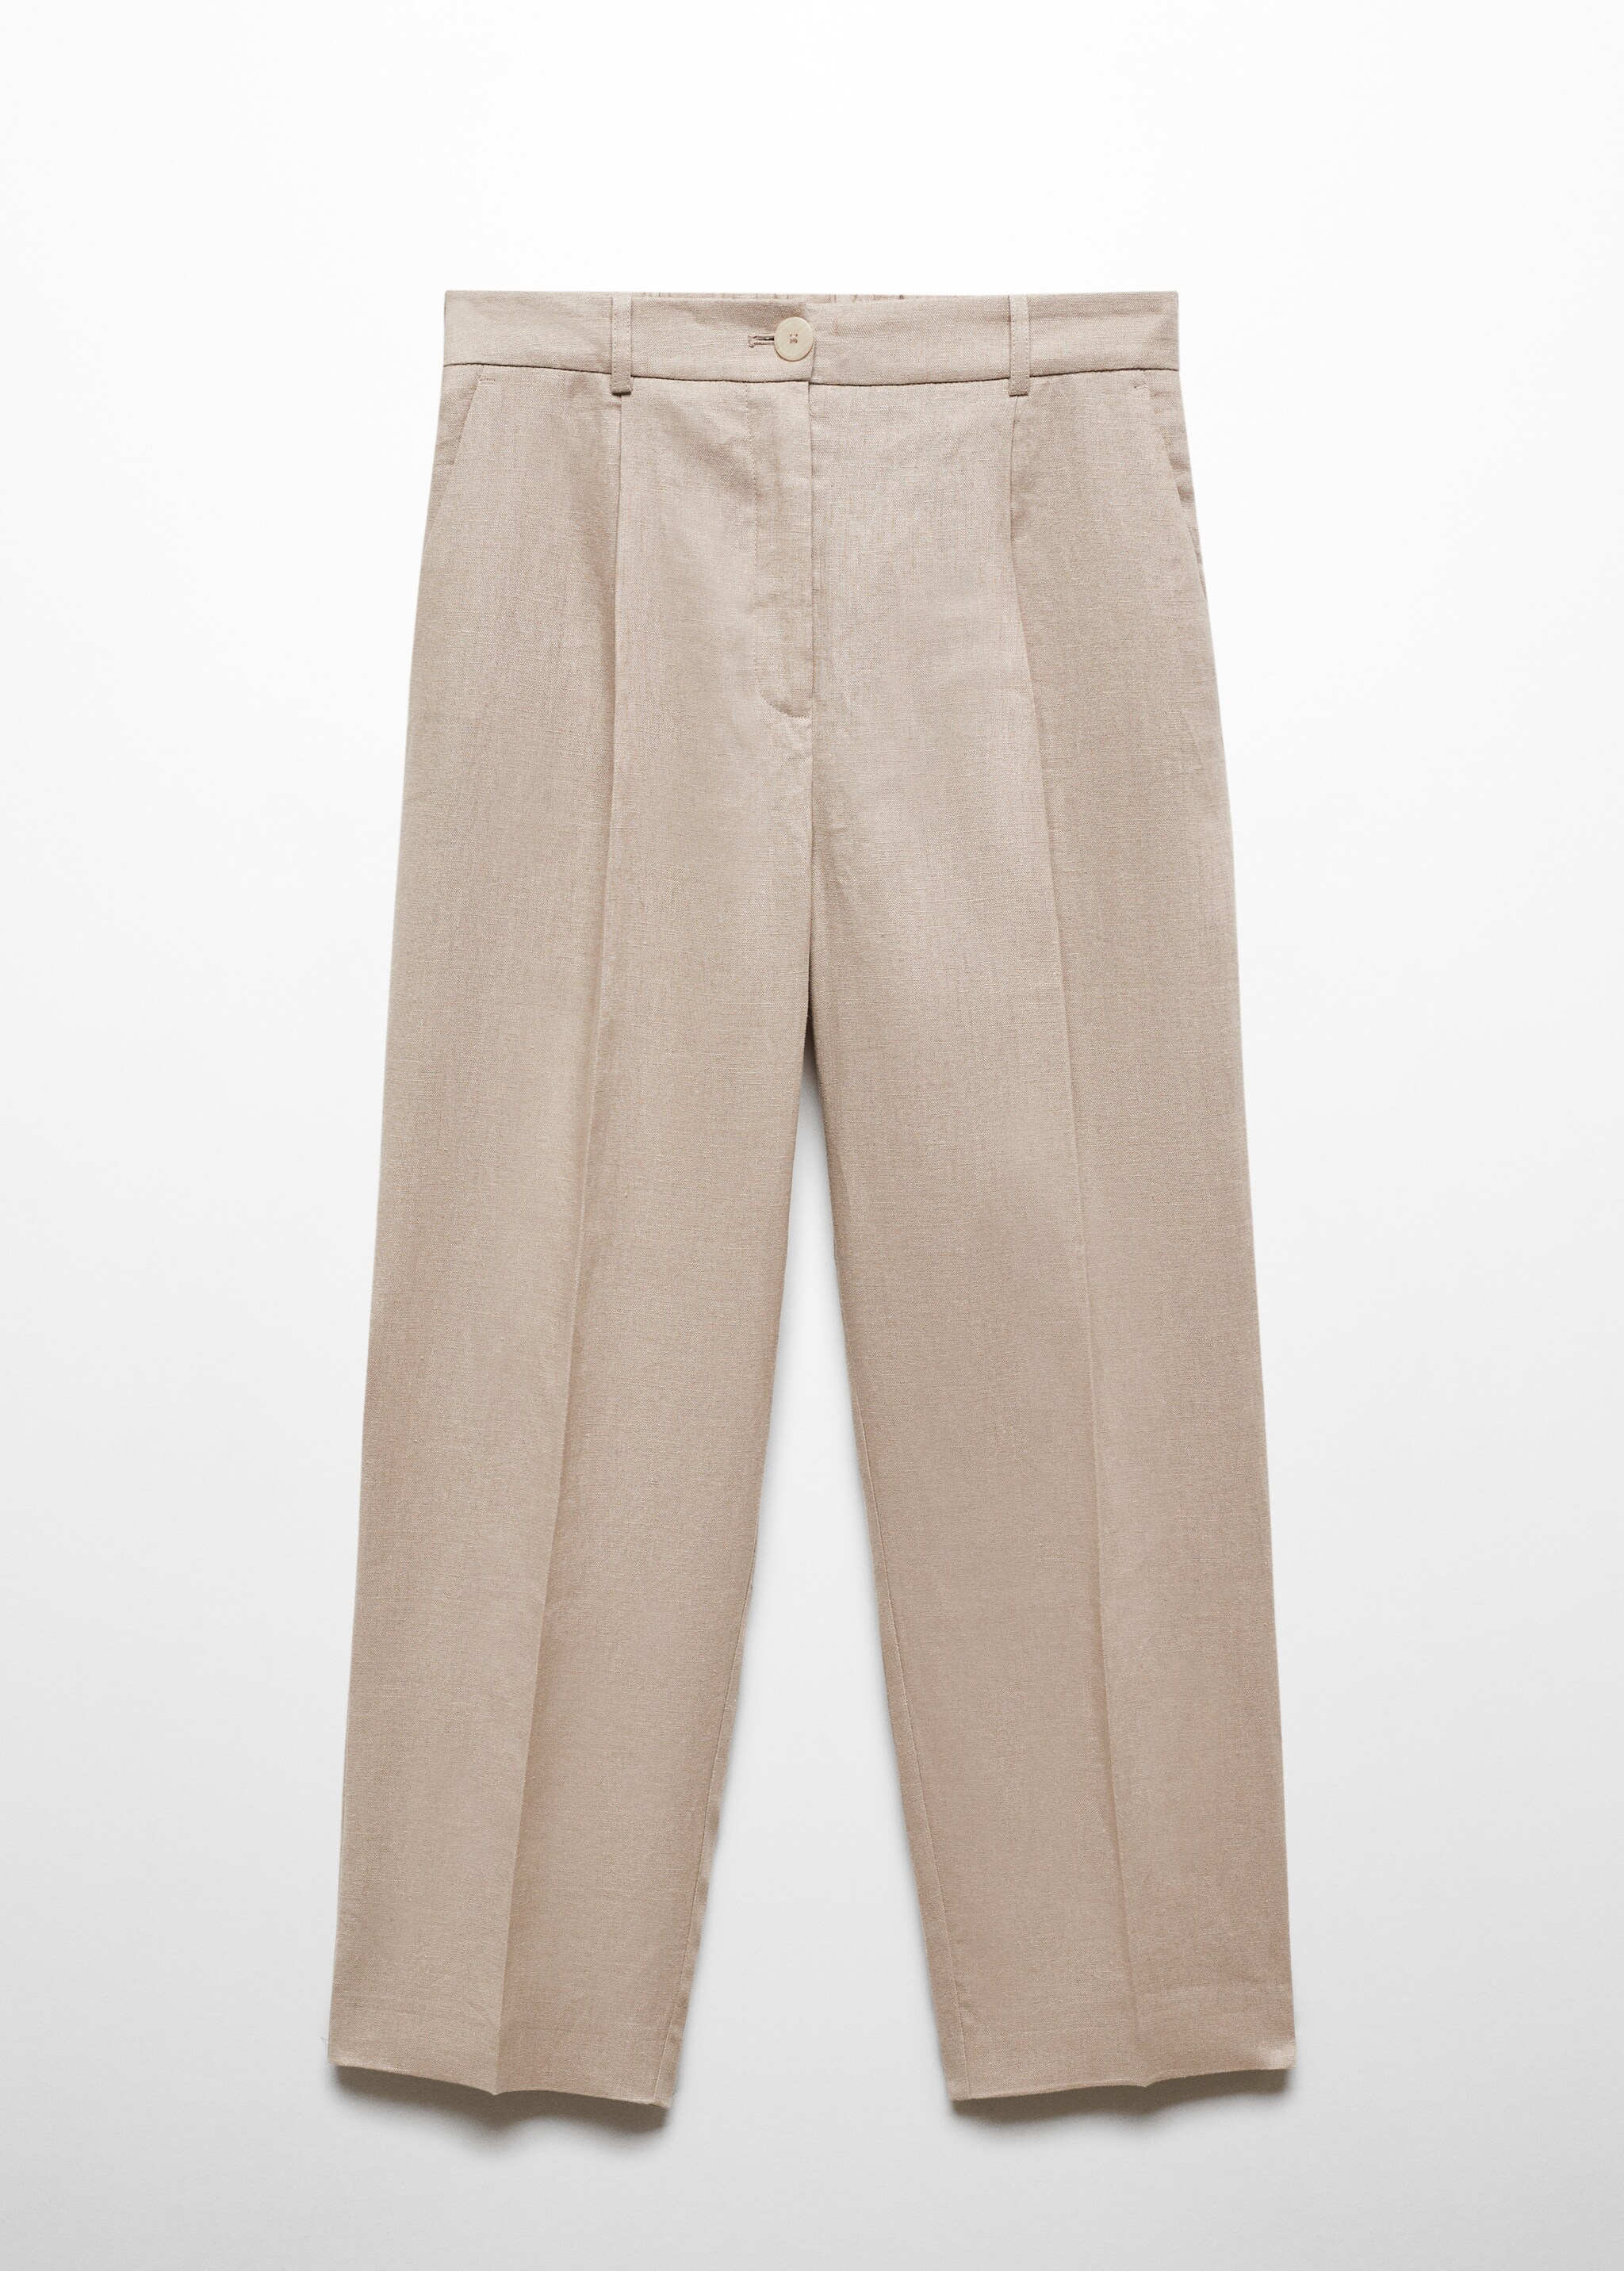 100% linen straight pants - Article without model